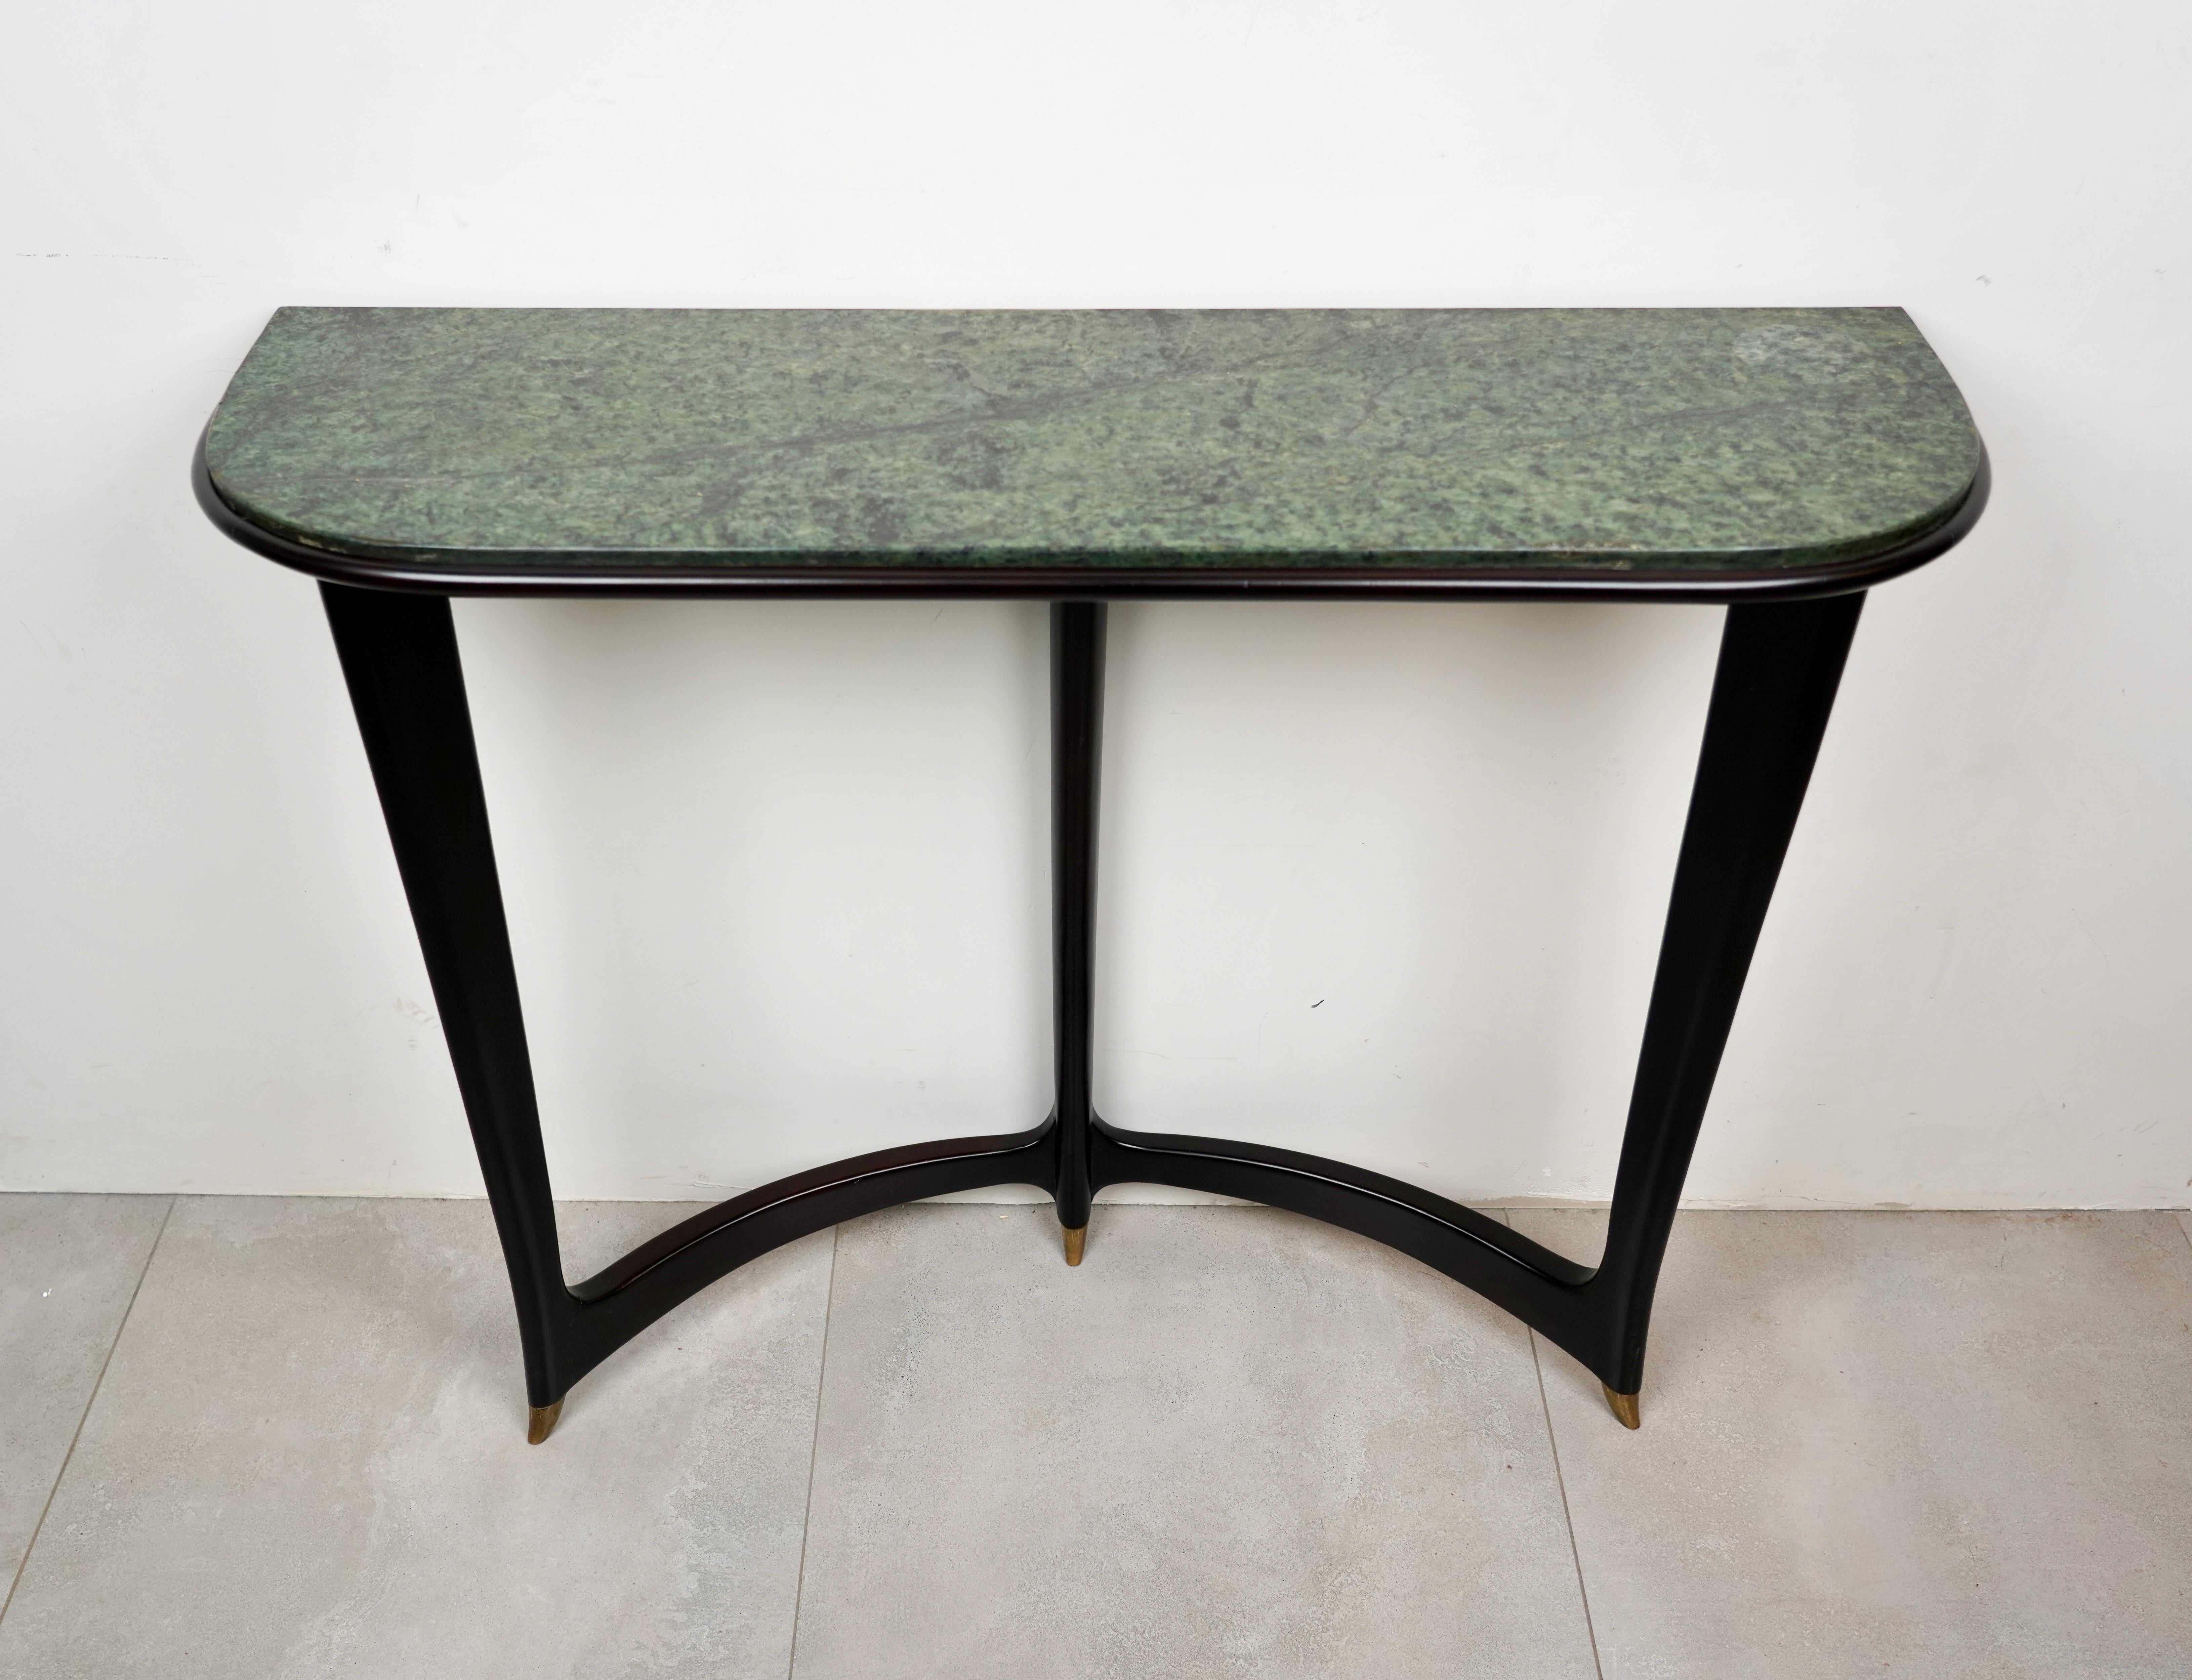 A very elegant and organic wall mount console table, original green marble top, wooden frame, tapered legs with brass puntali. Italian design by to Guglielmo Ulrich, circa 1940.